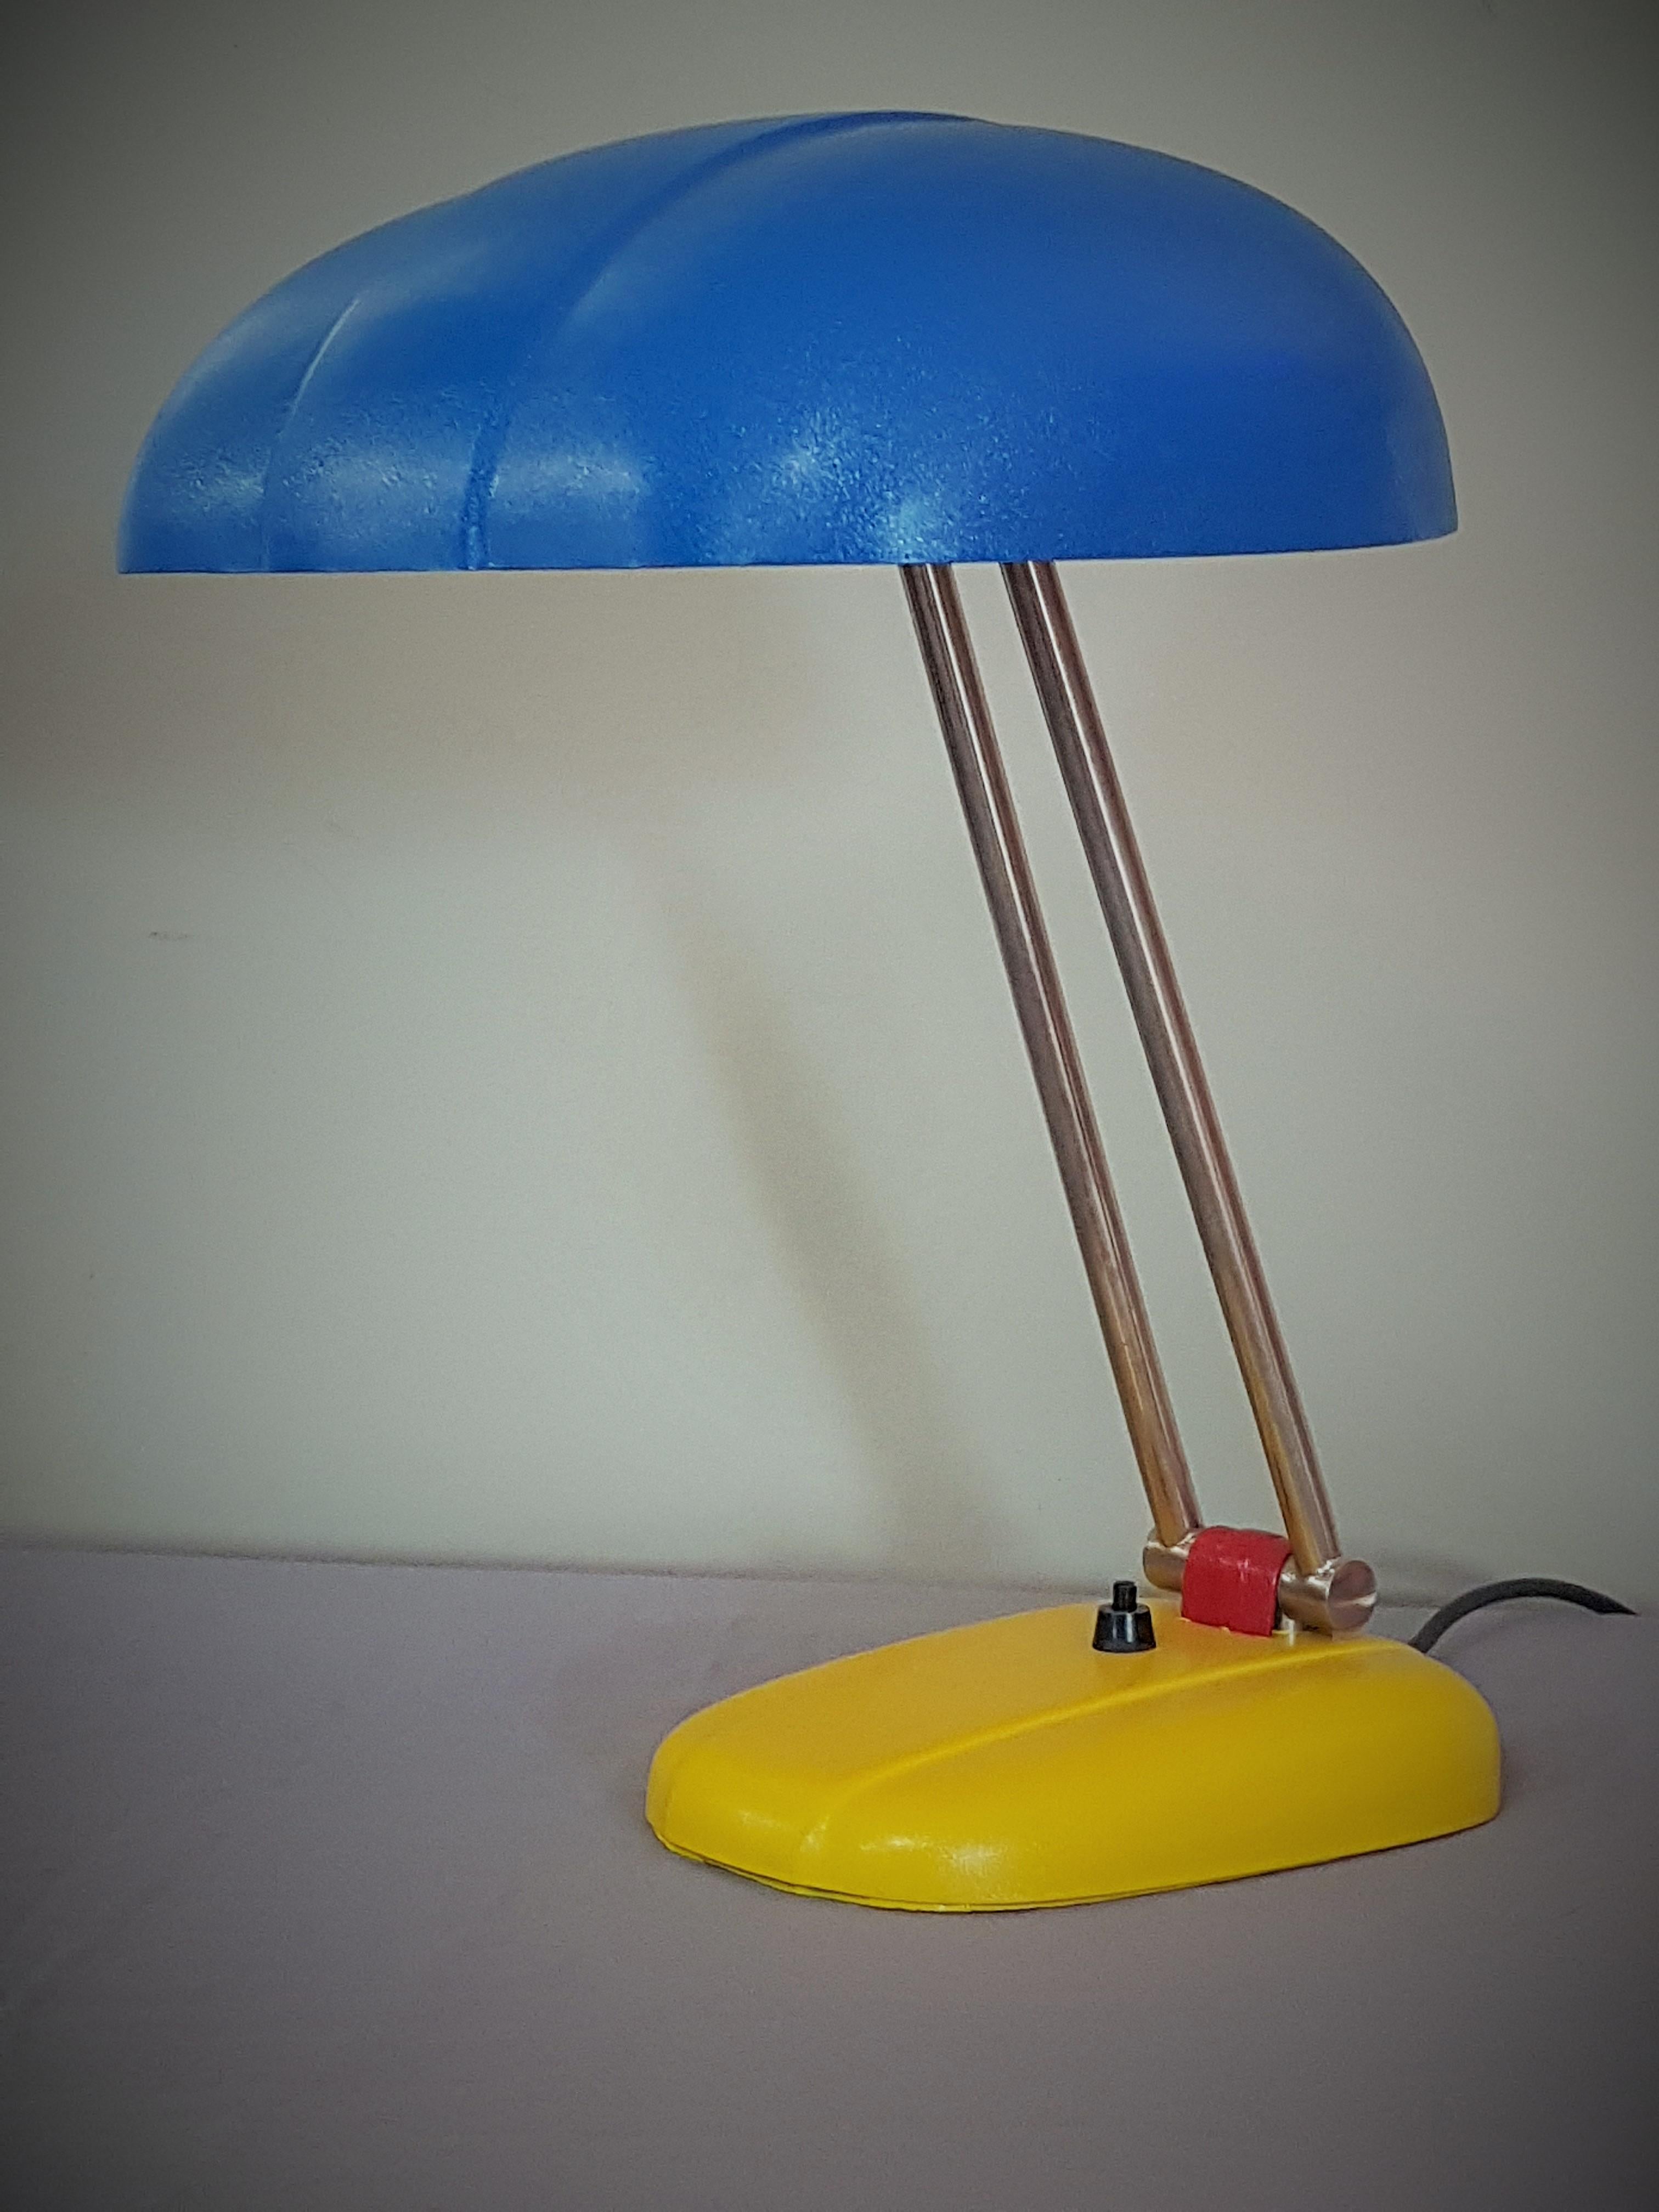 Art Deco Midcentury Swiss Table Lamp by S. Giedion for BAG Turgi, 1930s For Sale 7